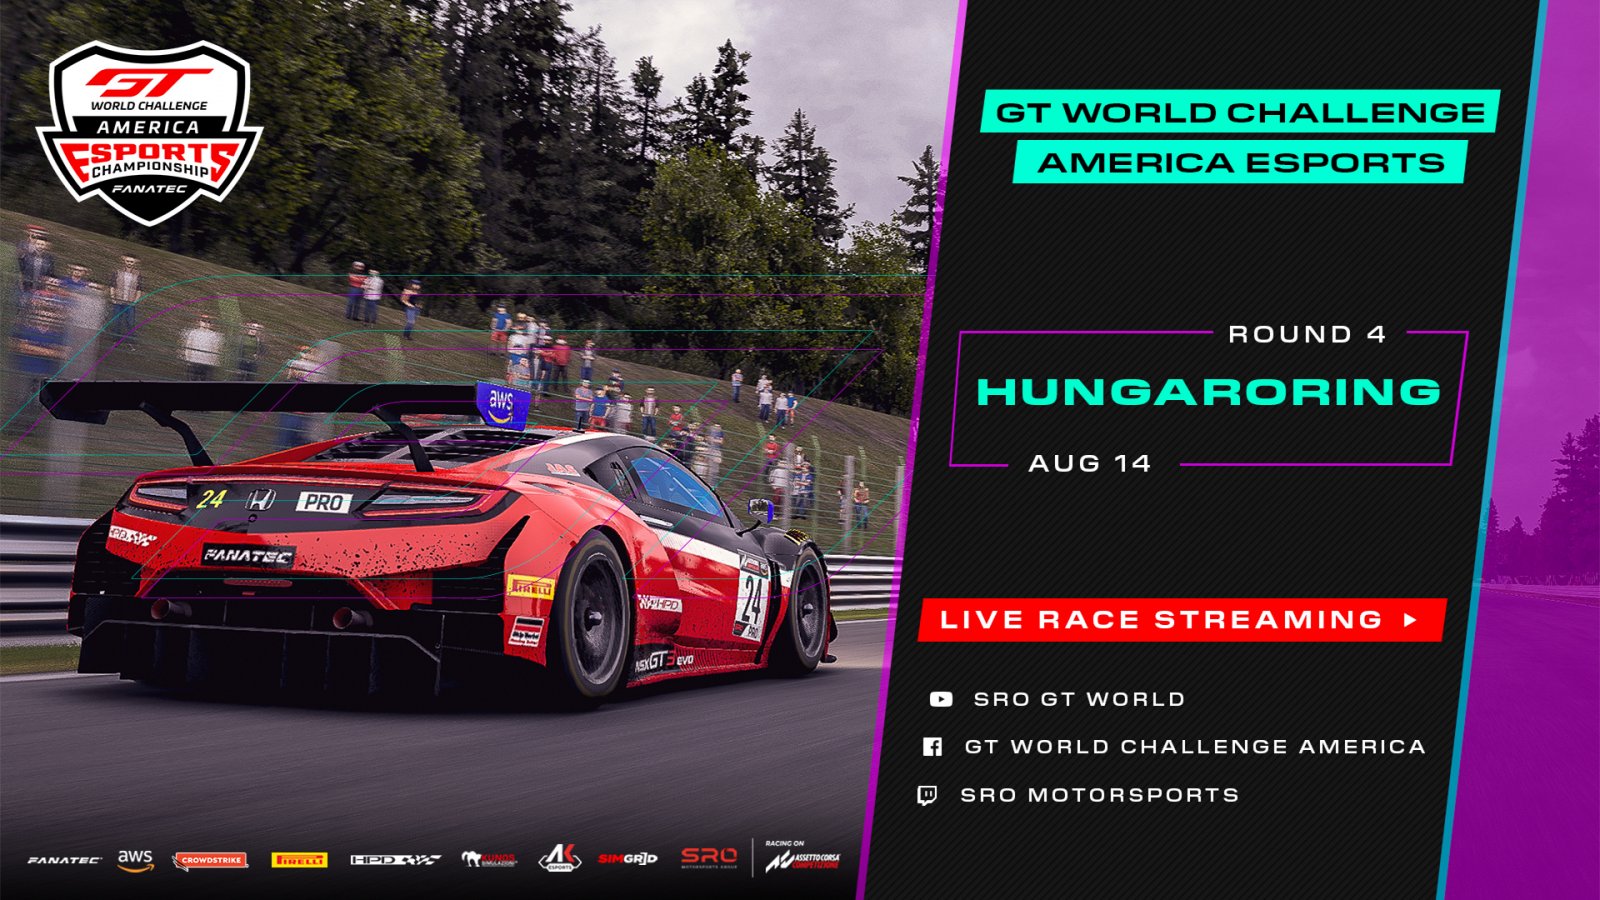 44 Competitors To Take the Grid for Hungaroring Esports Battle